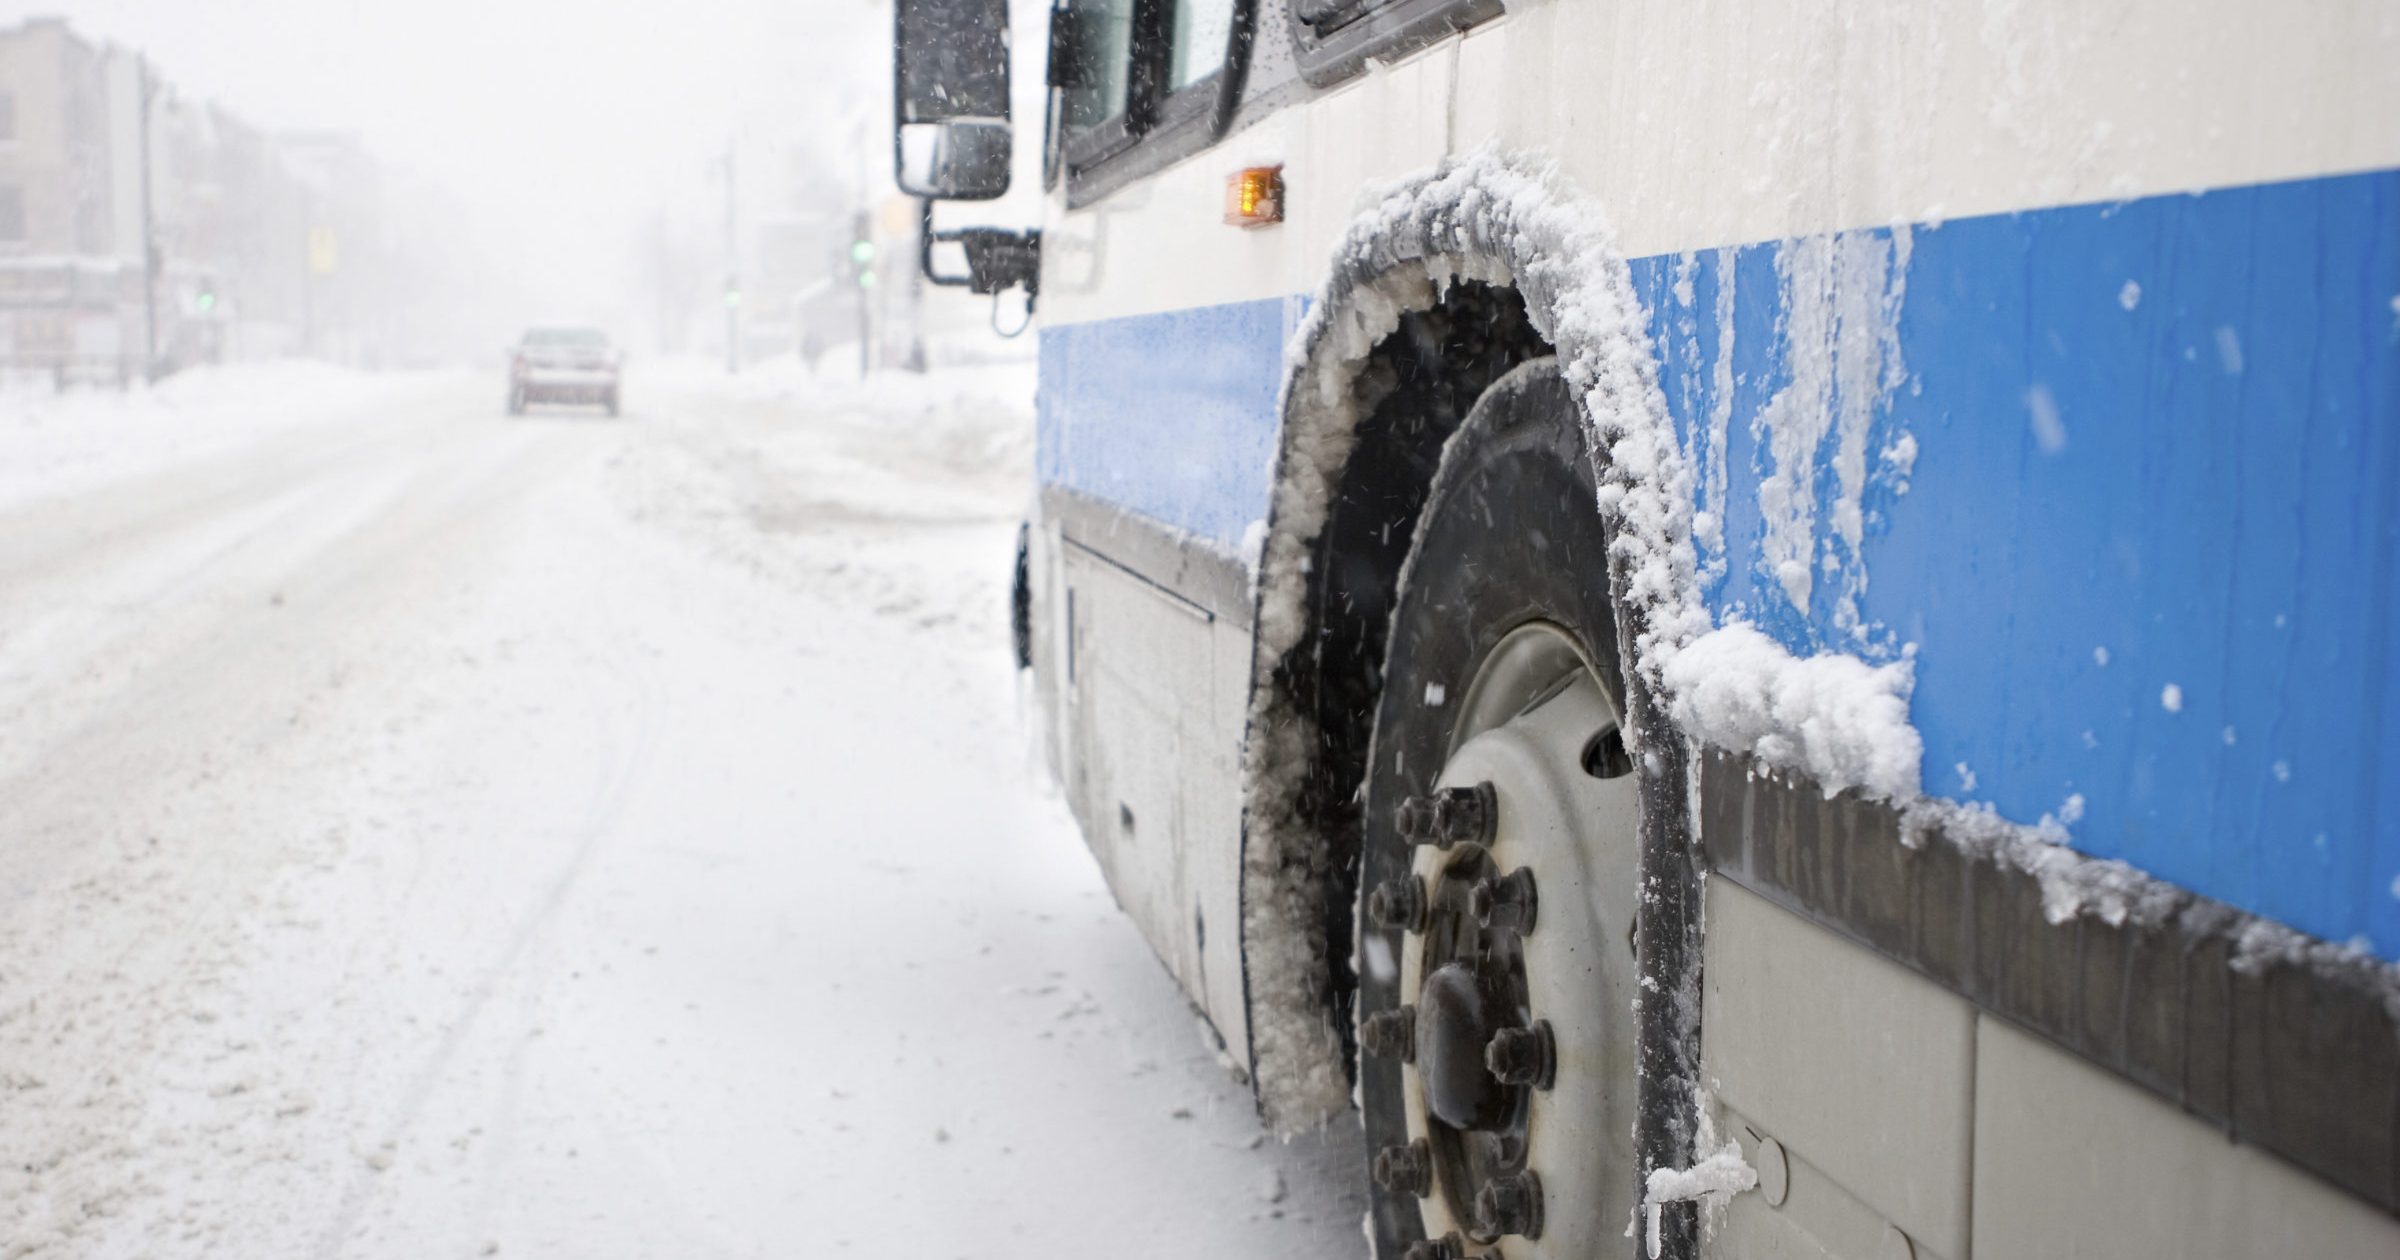 Montreal City Bus in a Blizzard